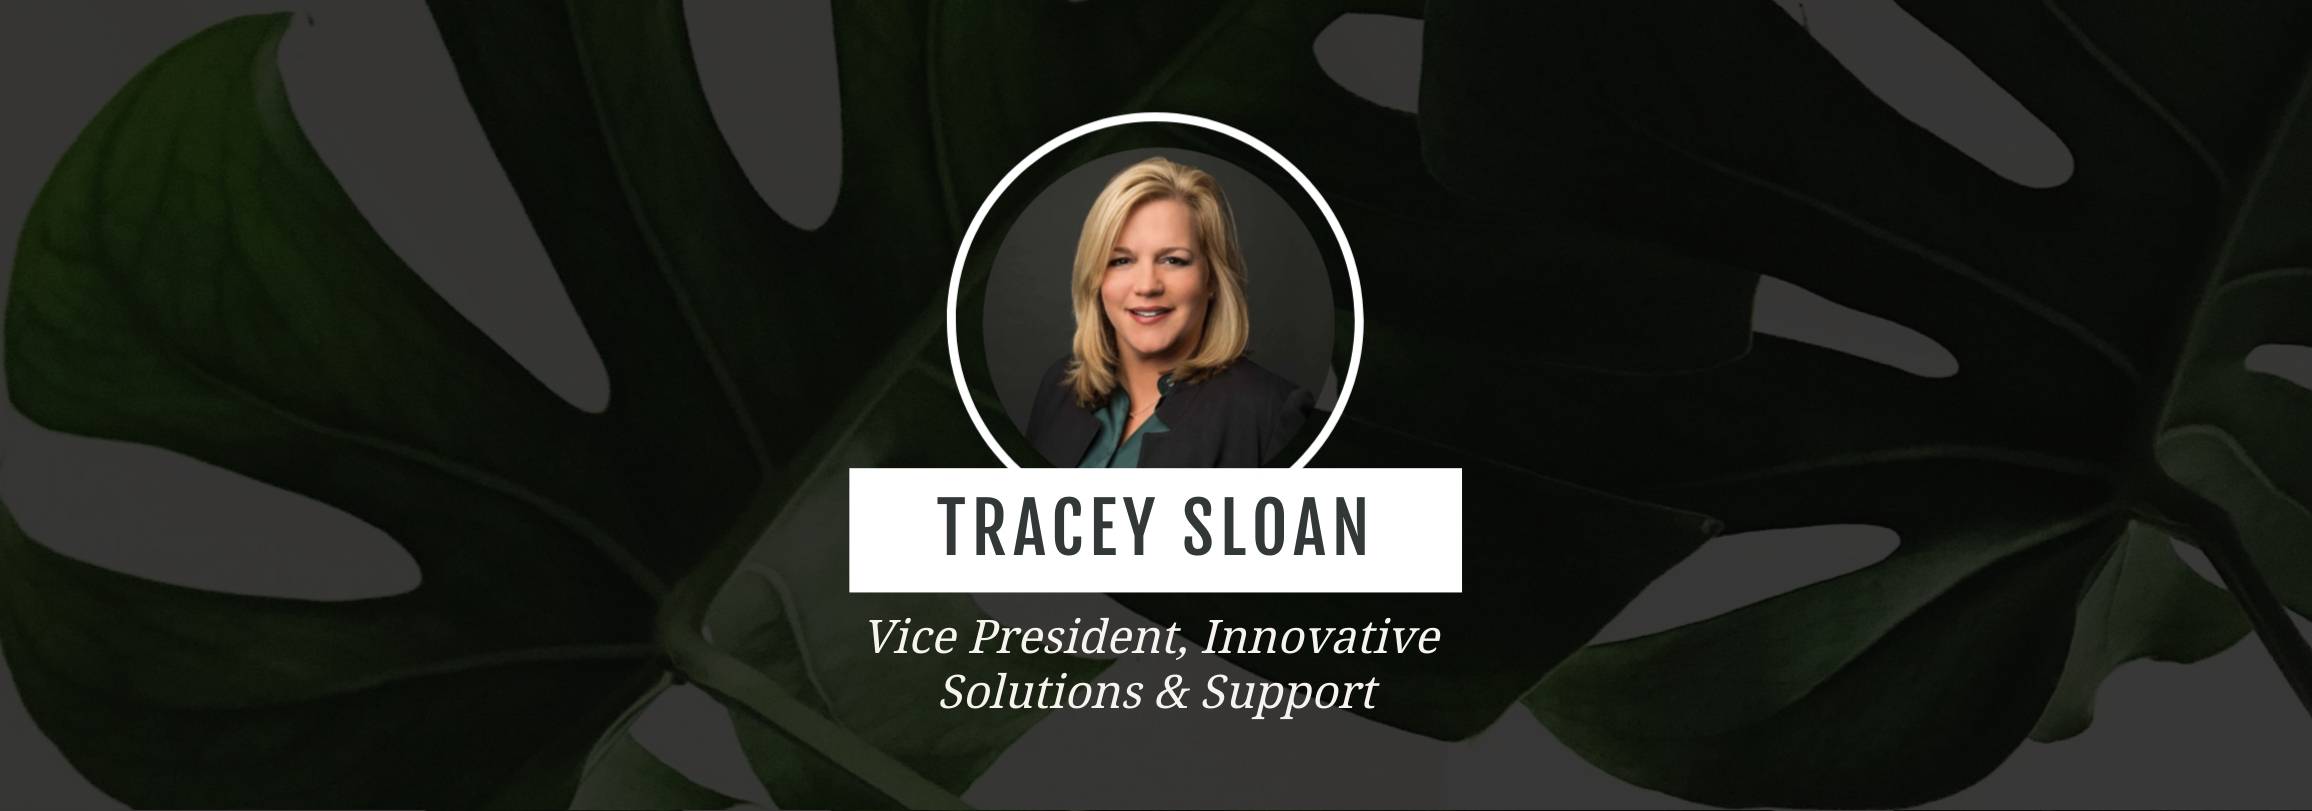 Tracey Sloan VP Innovative Solutions & Support